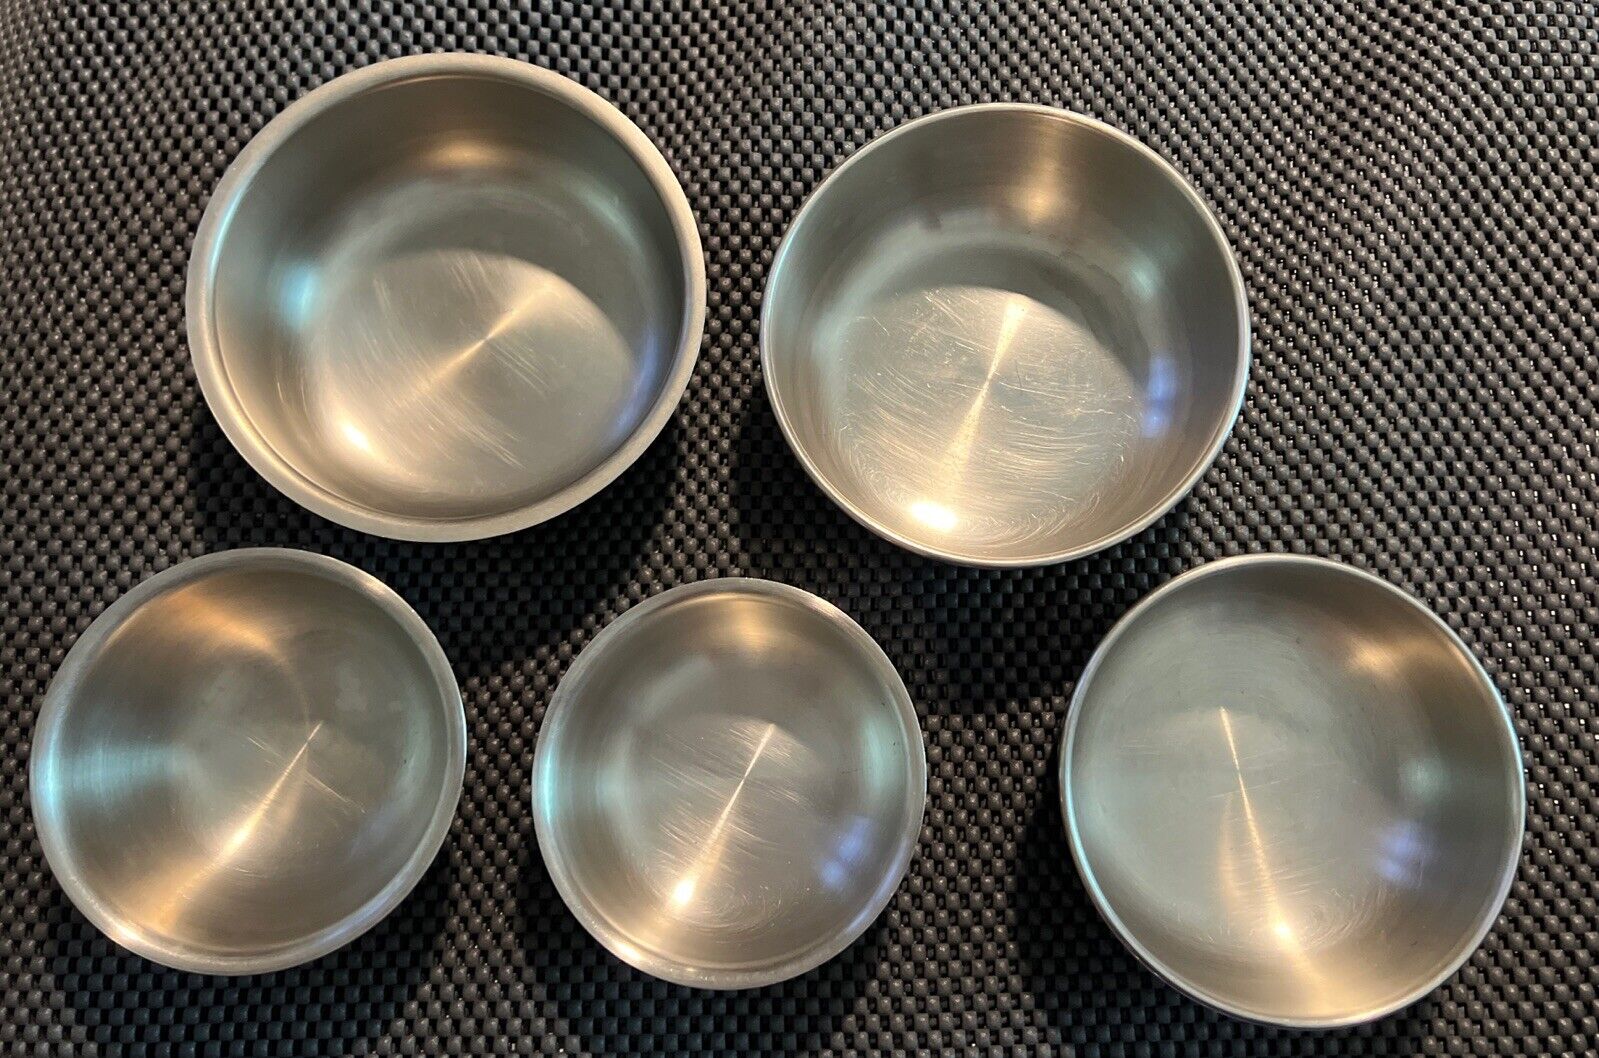 Vintage Vollrath Stainless Steel Bowls Lot Of 5 Bowls